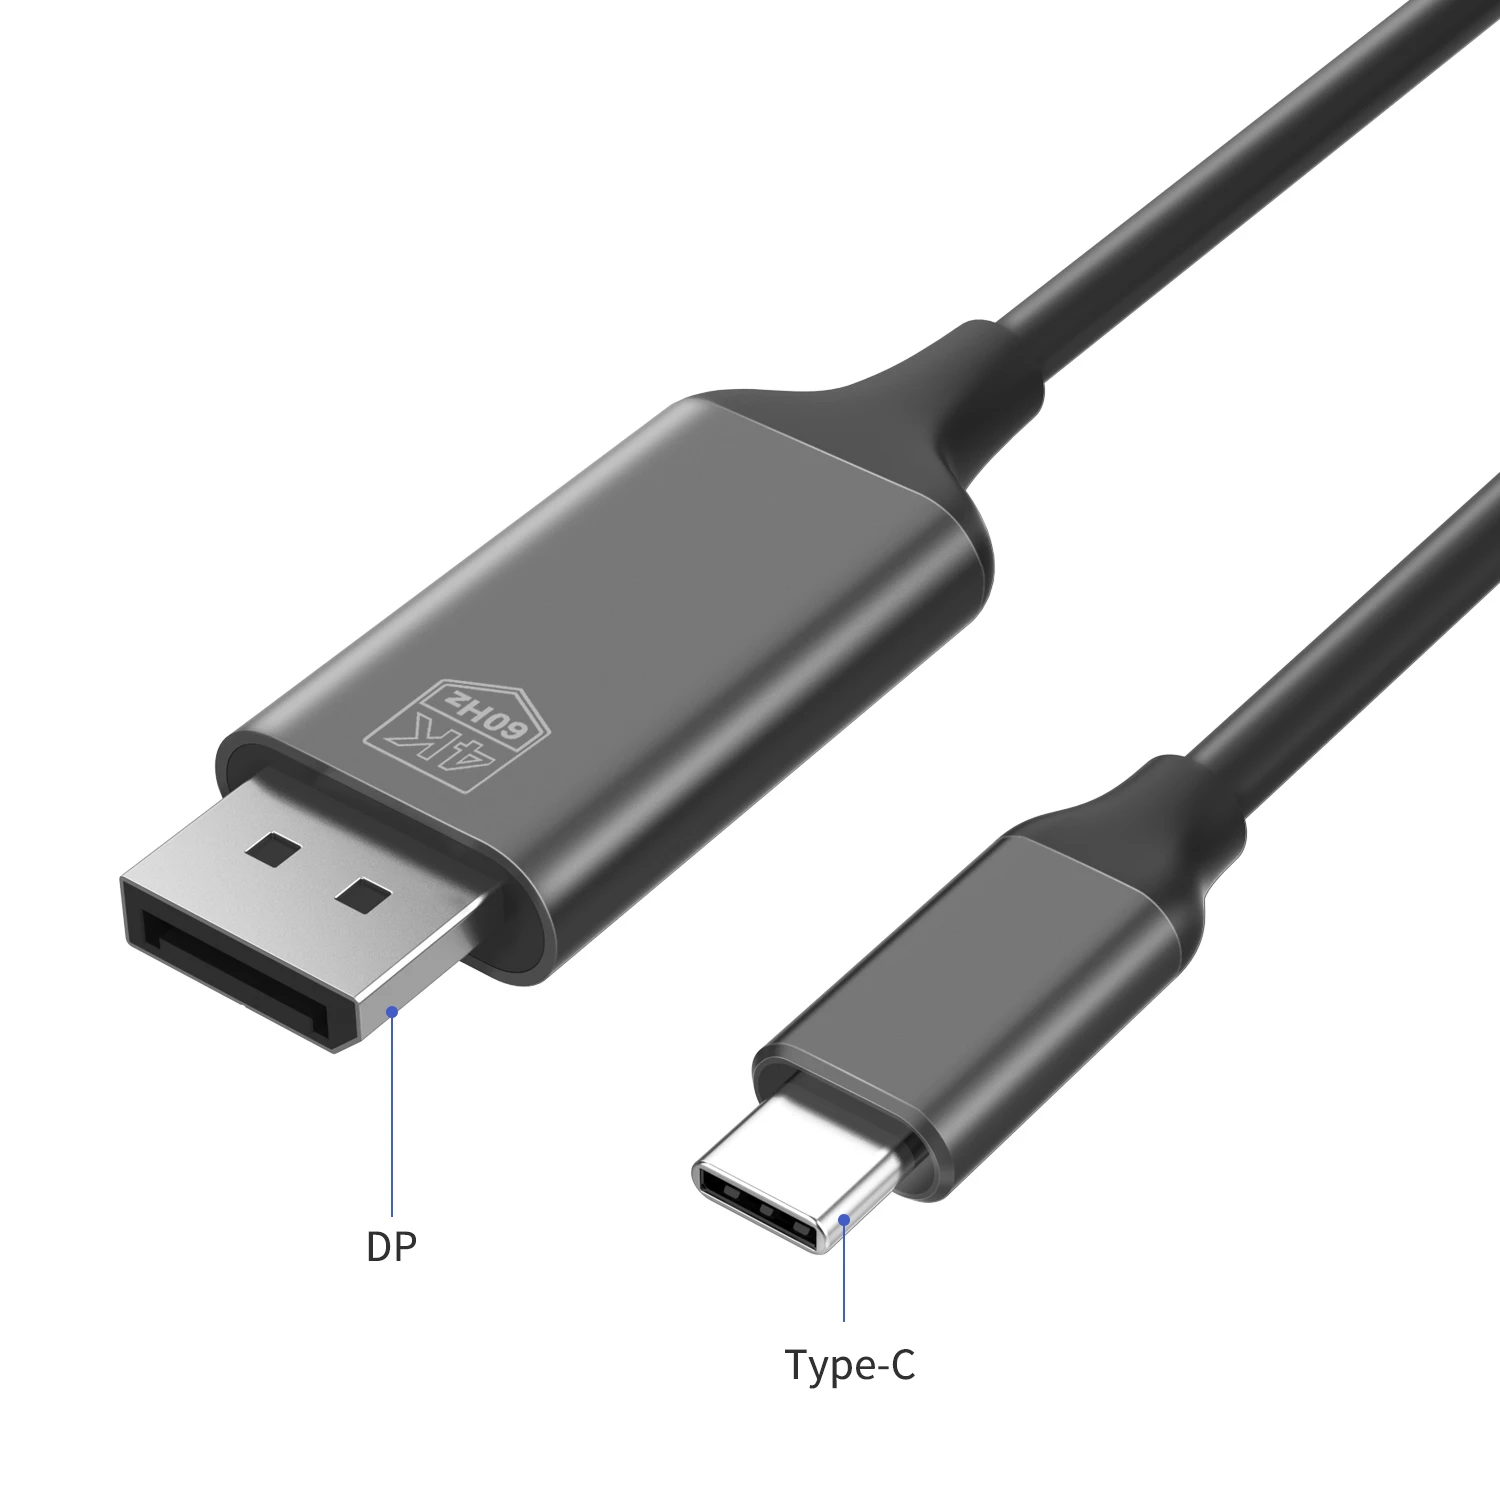 

Thunderbolt 3 USB C DP1.4 4K 60Hz Cable Type C to DisplayPort Adapter Cable for Macbook Air Ipad Pro Samsung S21 Pixelbook XPS